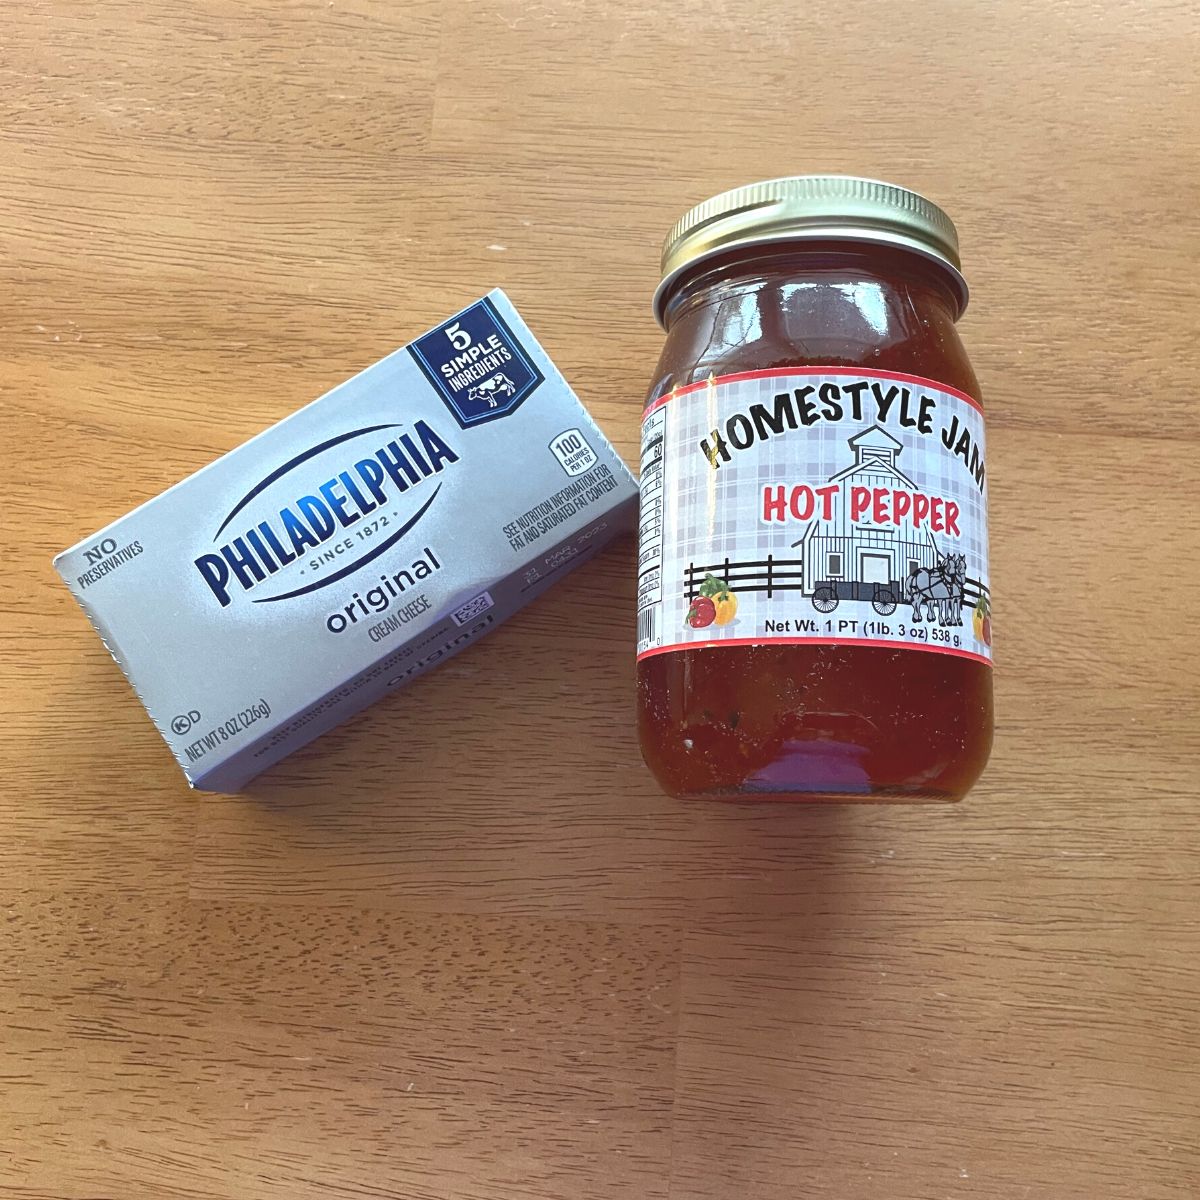 A jar of hot pepper jelly and a packet of cream cheese sitting on a wooden table.